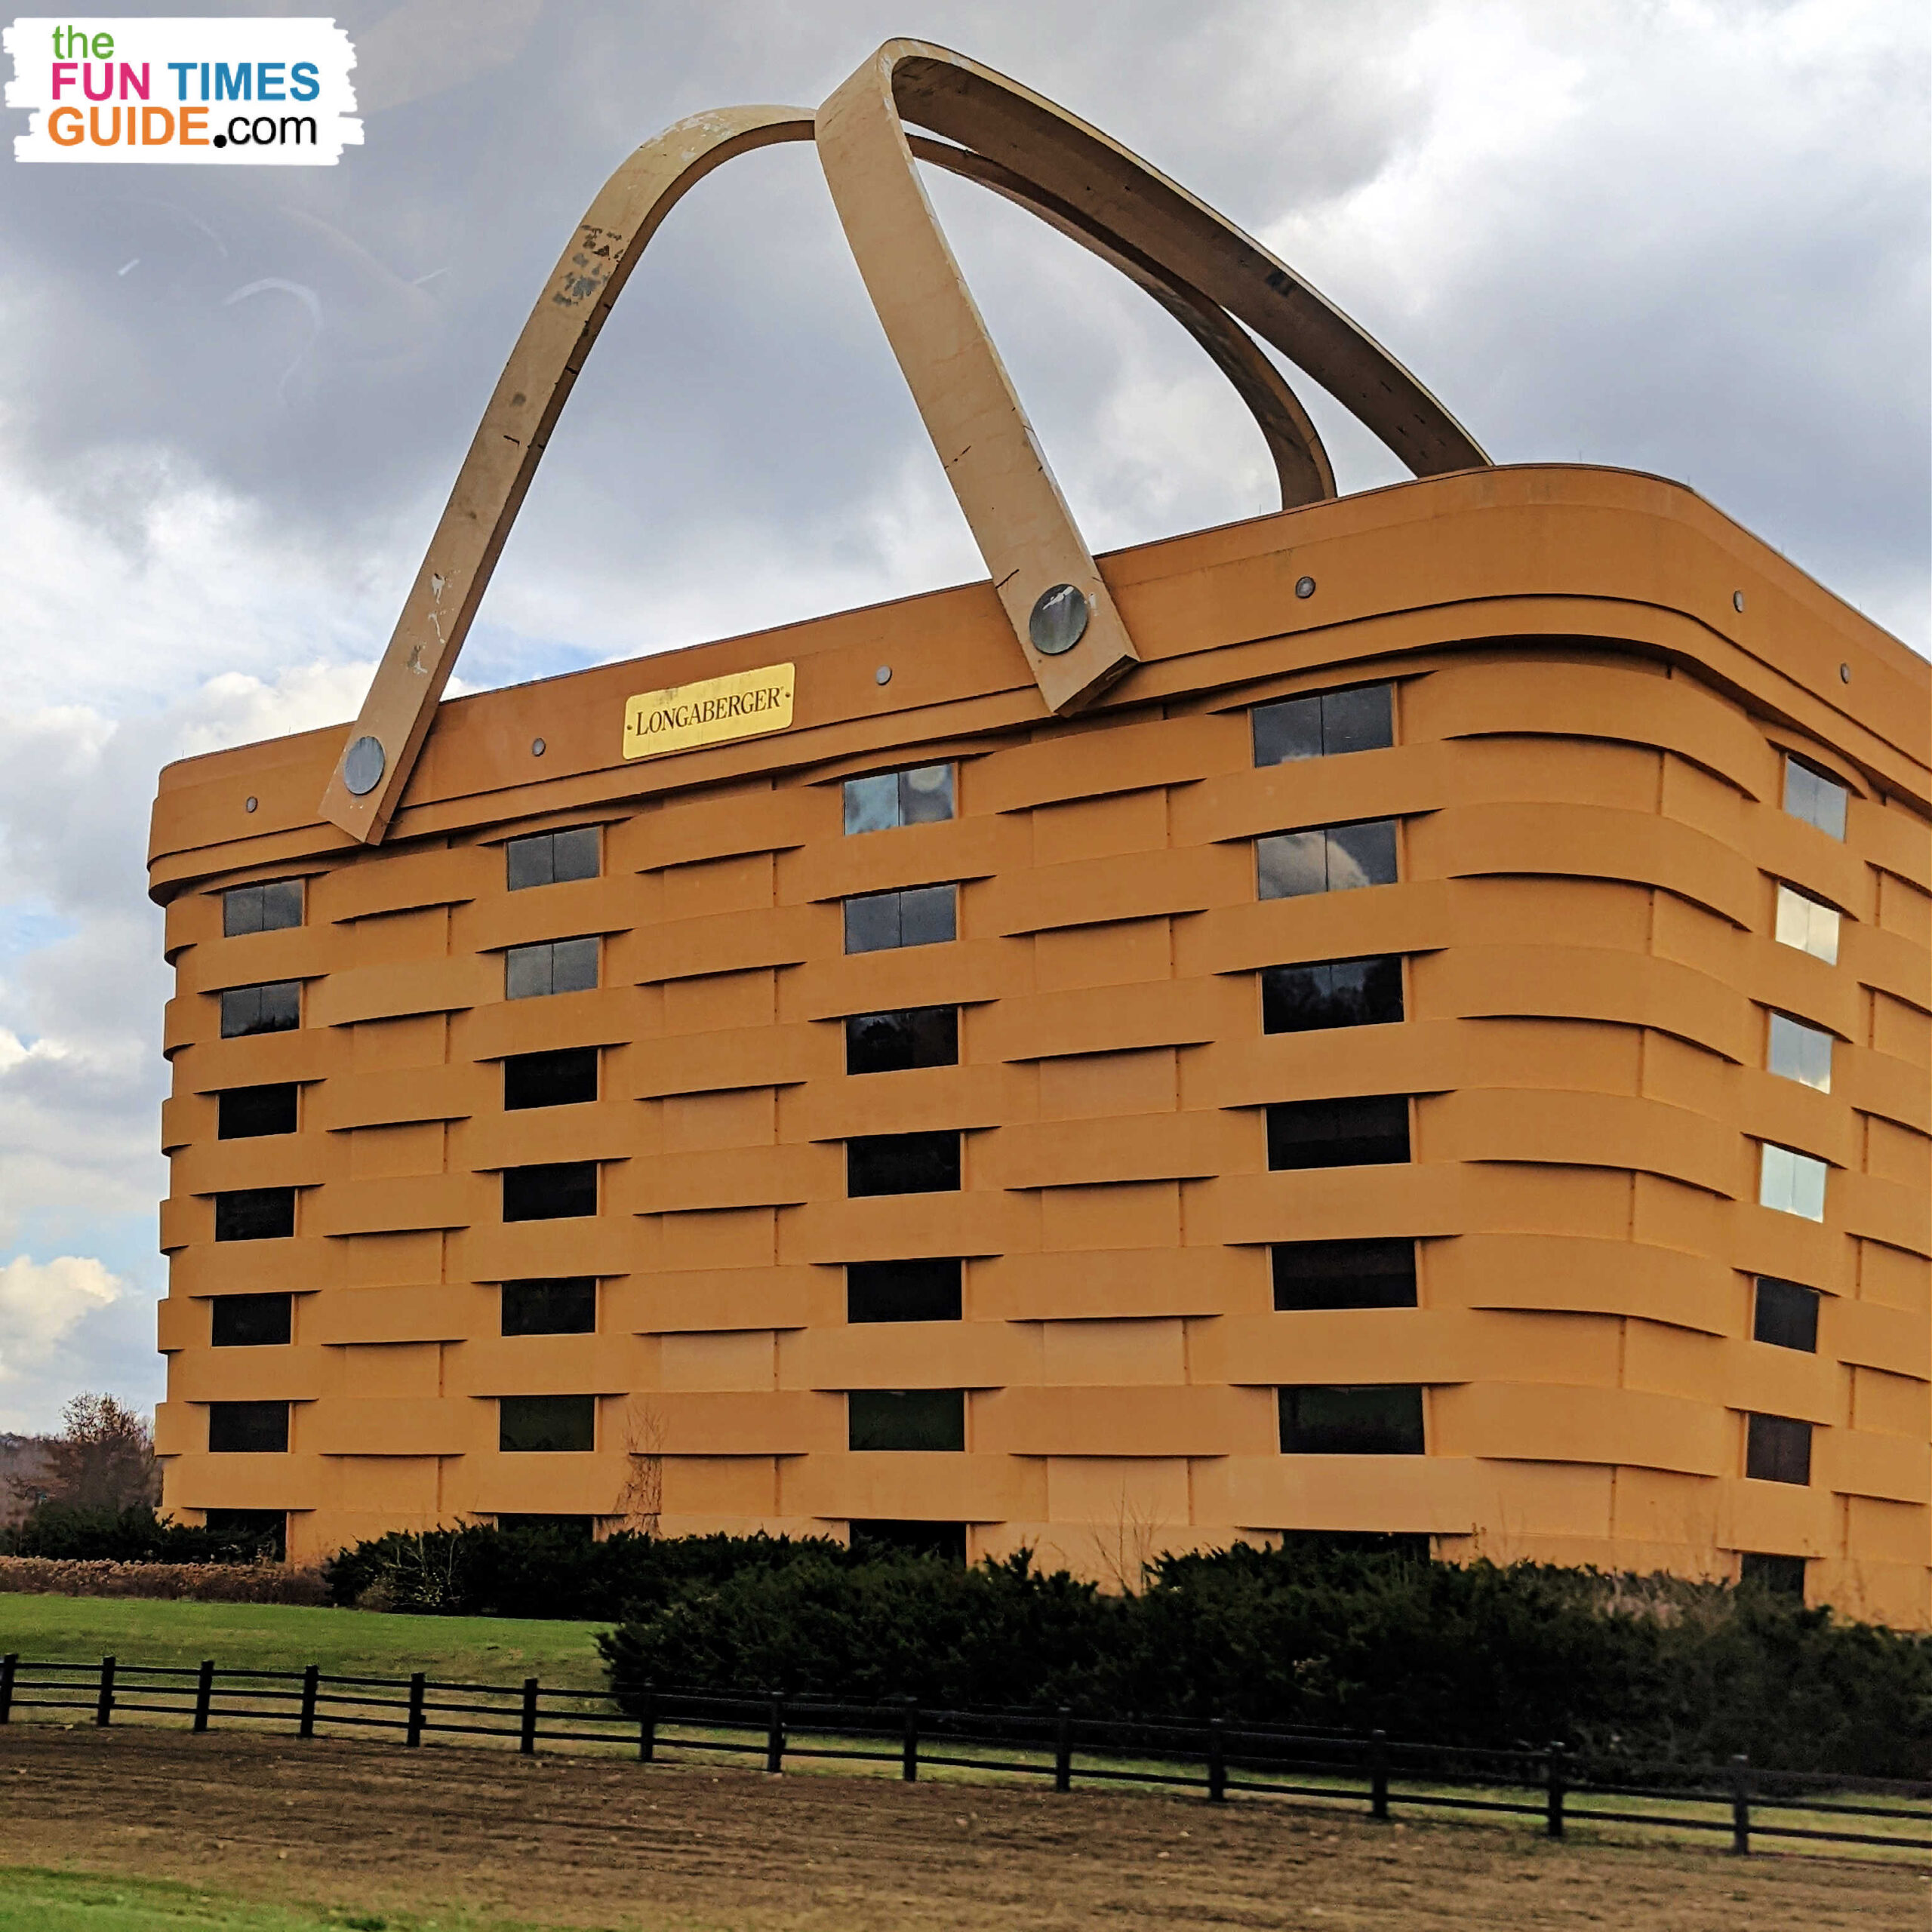 A closeup of the Longaberger Basket Building on Highway 16 in Newark, Ohio.